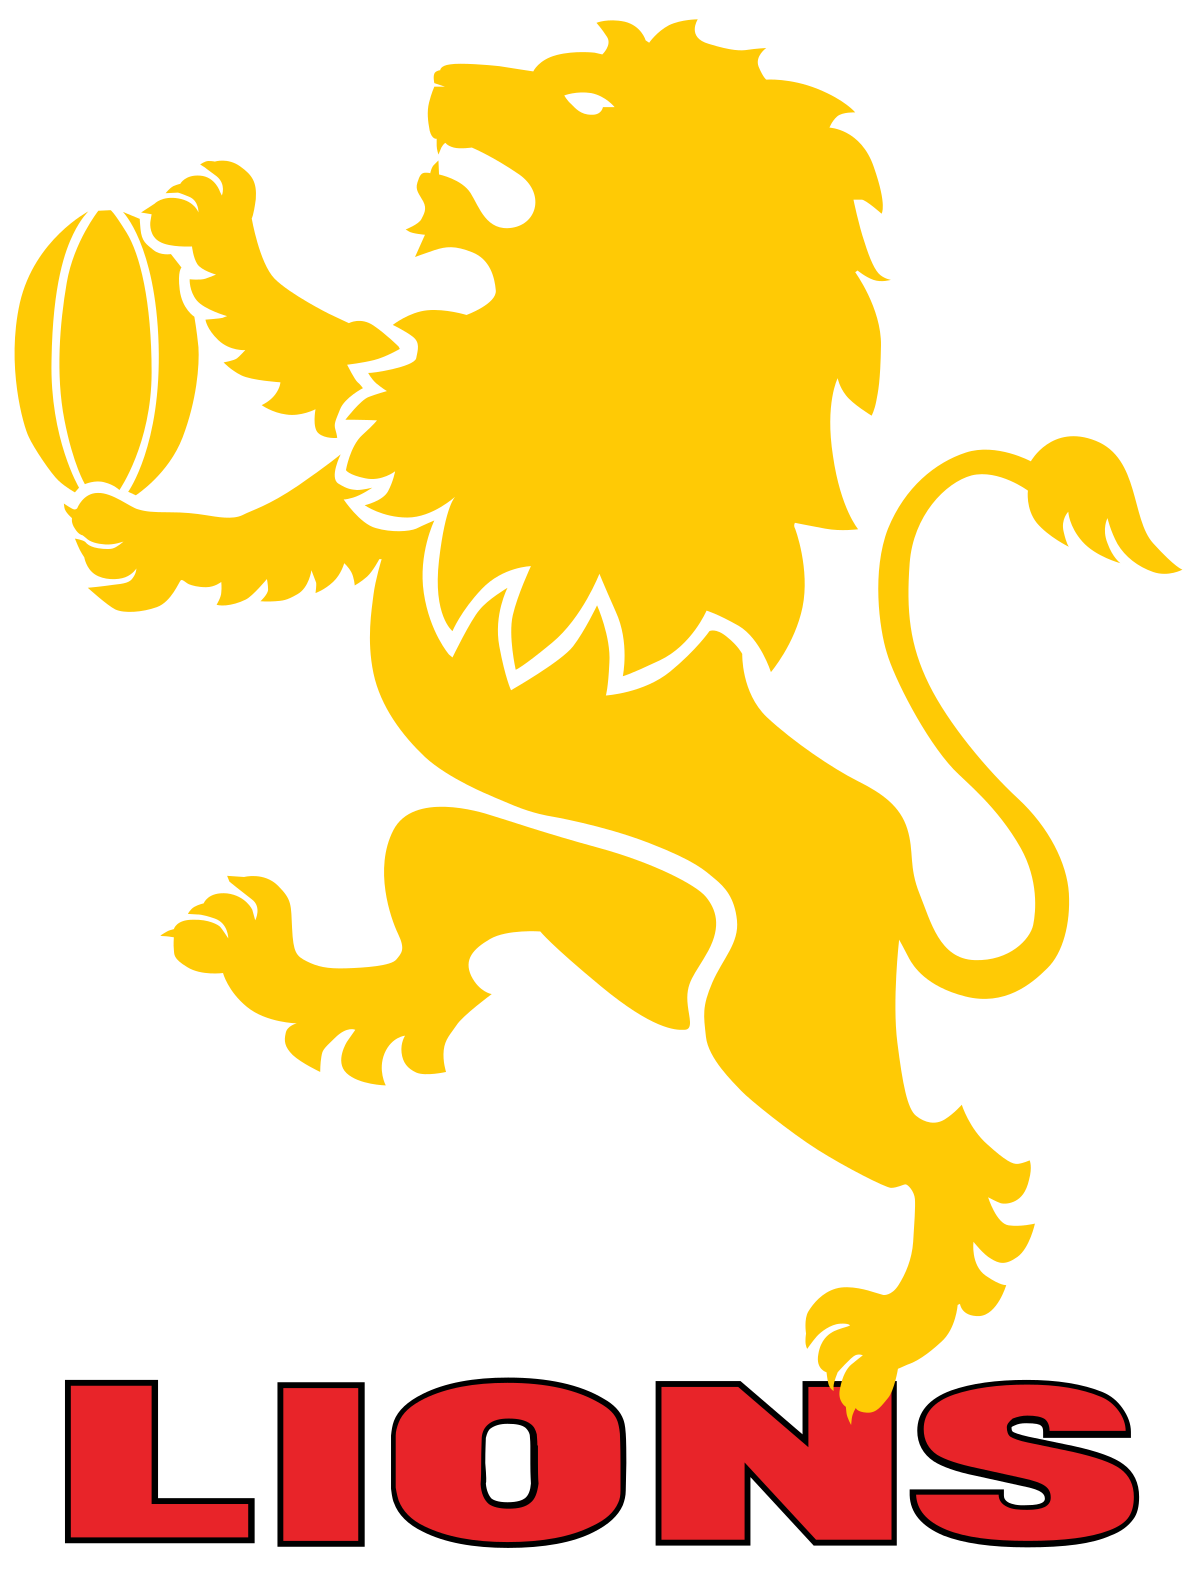 Lion rugby